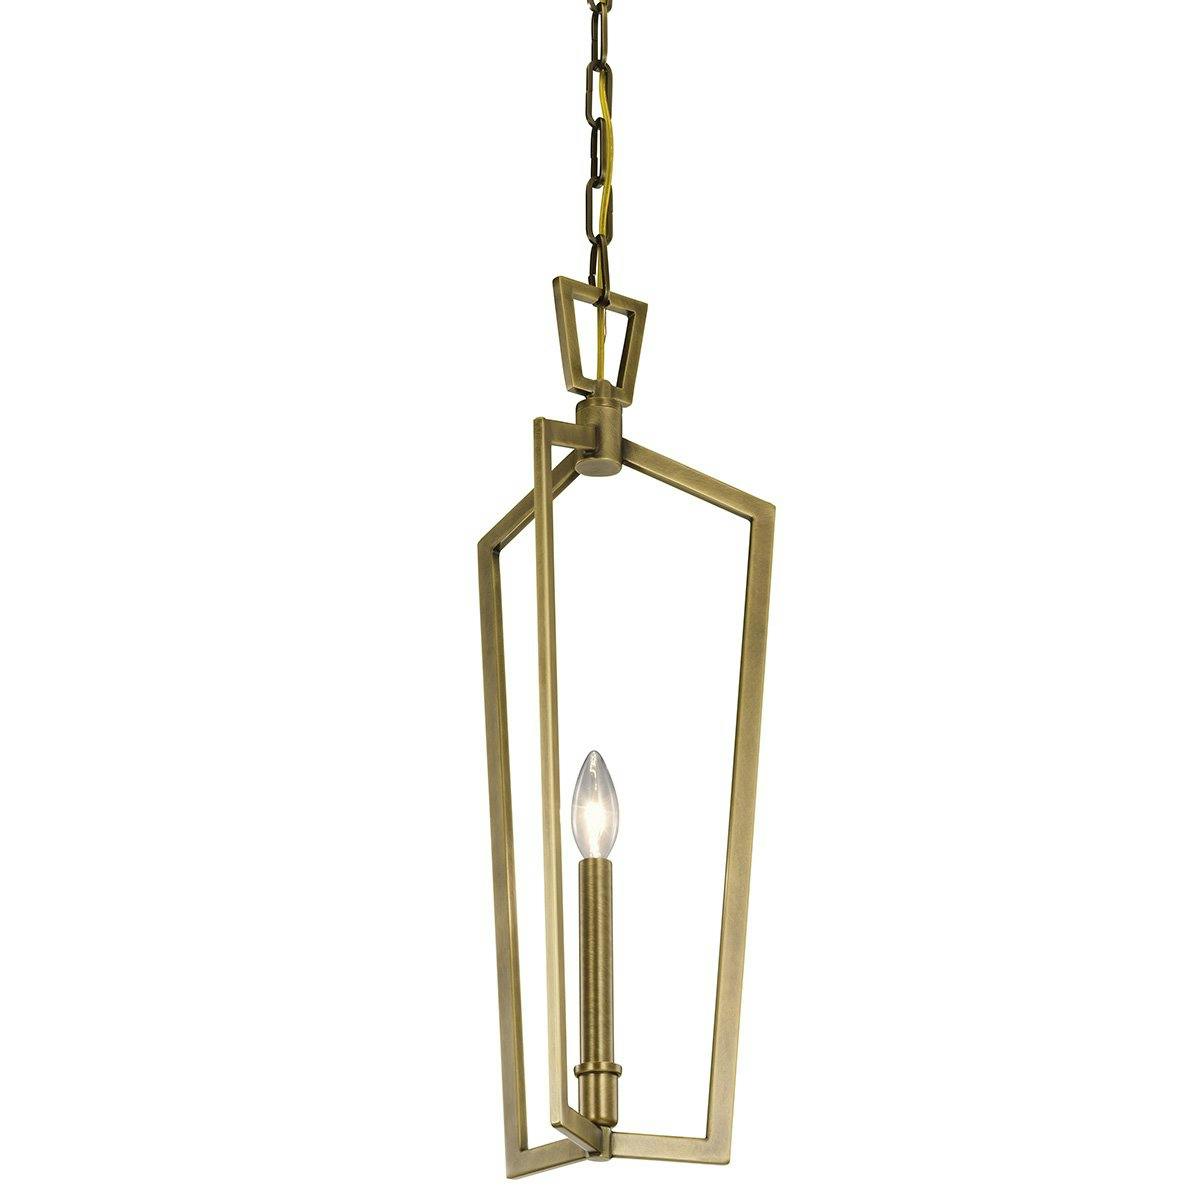 Close up view of the Abbotswell 23.5" Mini Pendant Brass on a white background